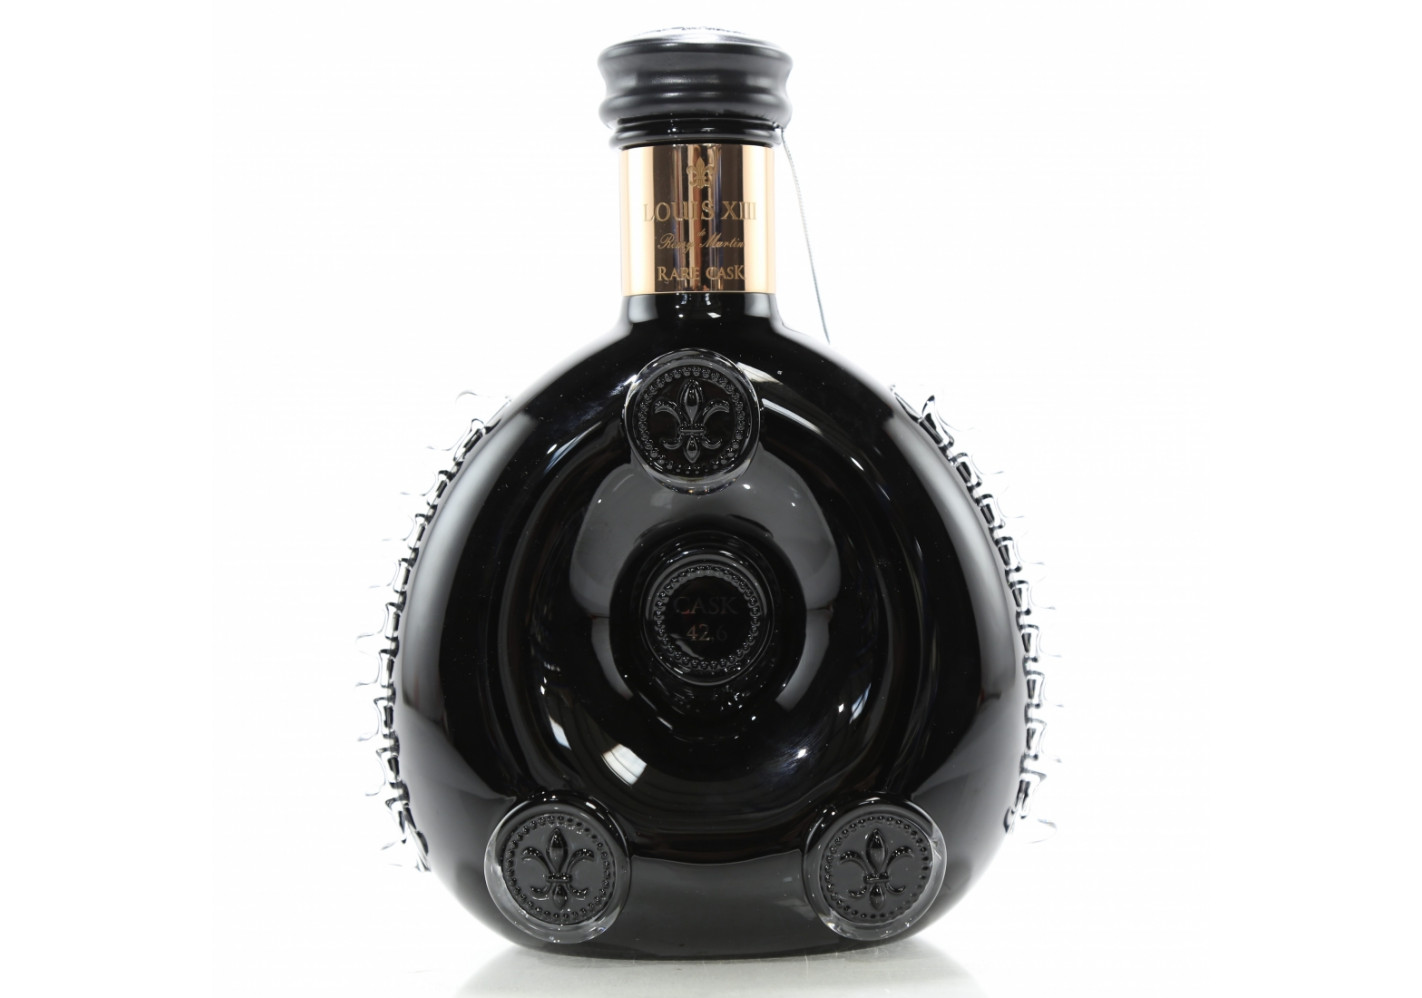 Where to buy Louis XIII de Remy Martin 'The Legacy' Grande Champagne Cognac,  France